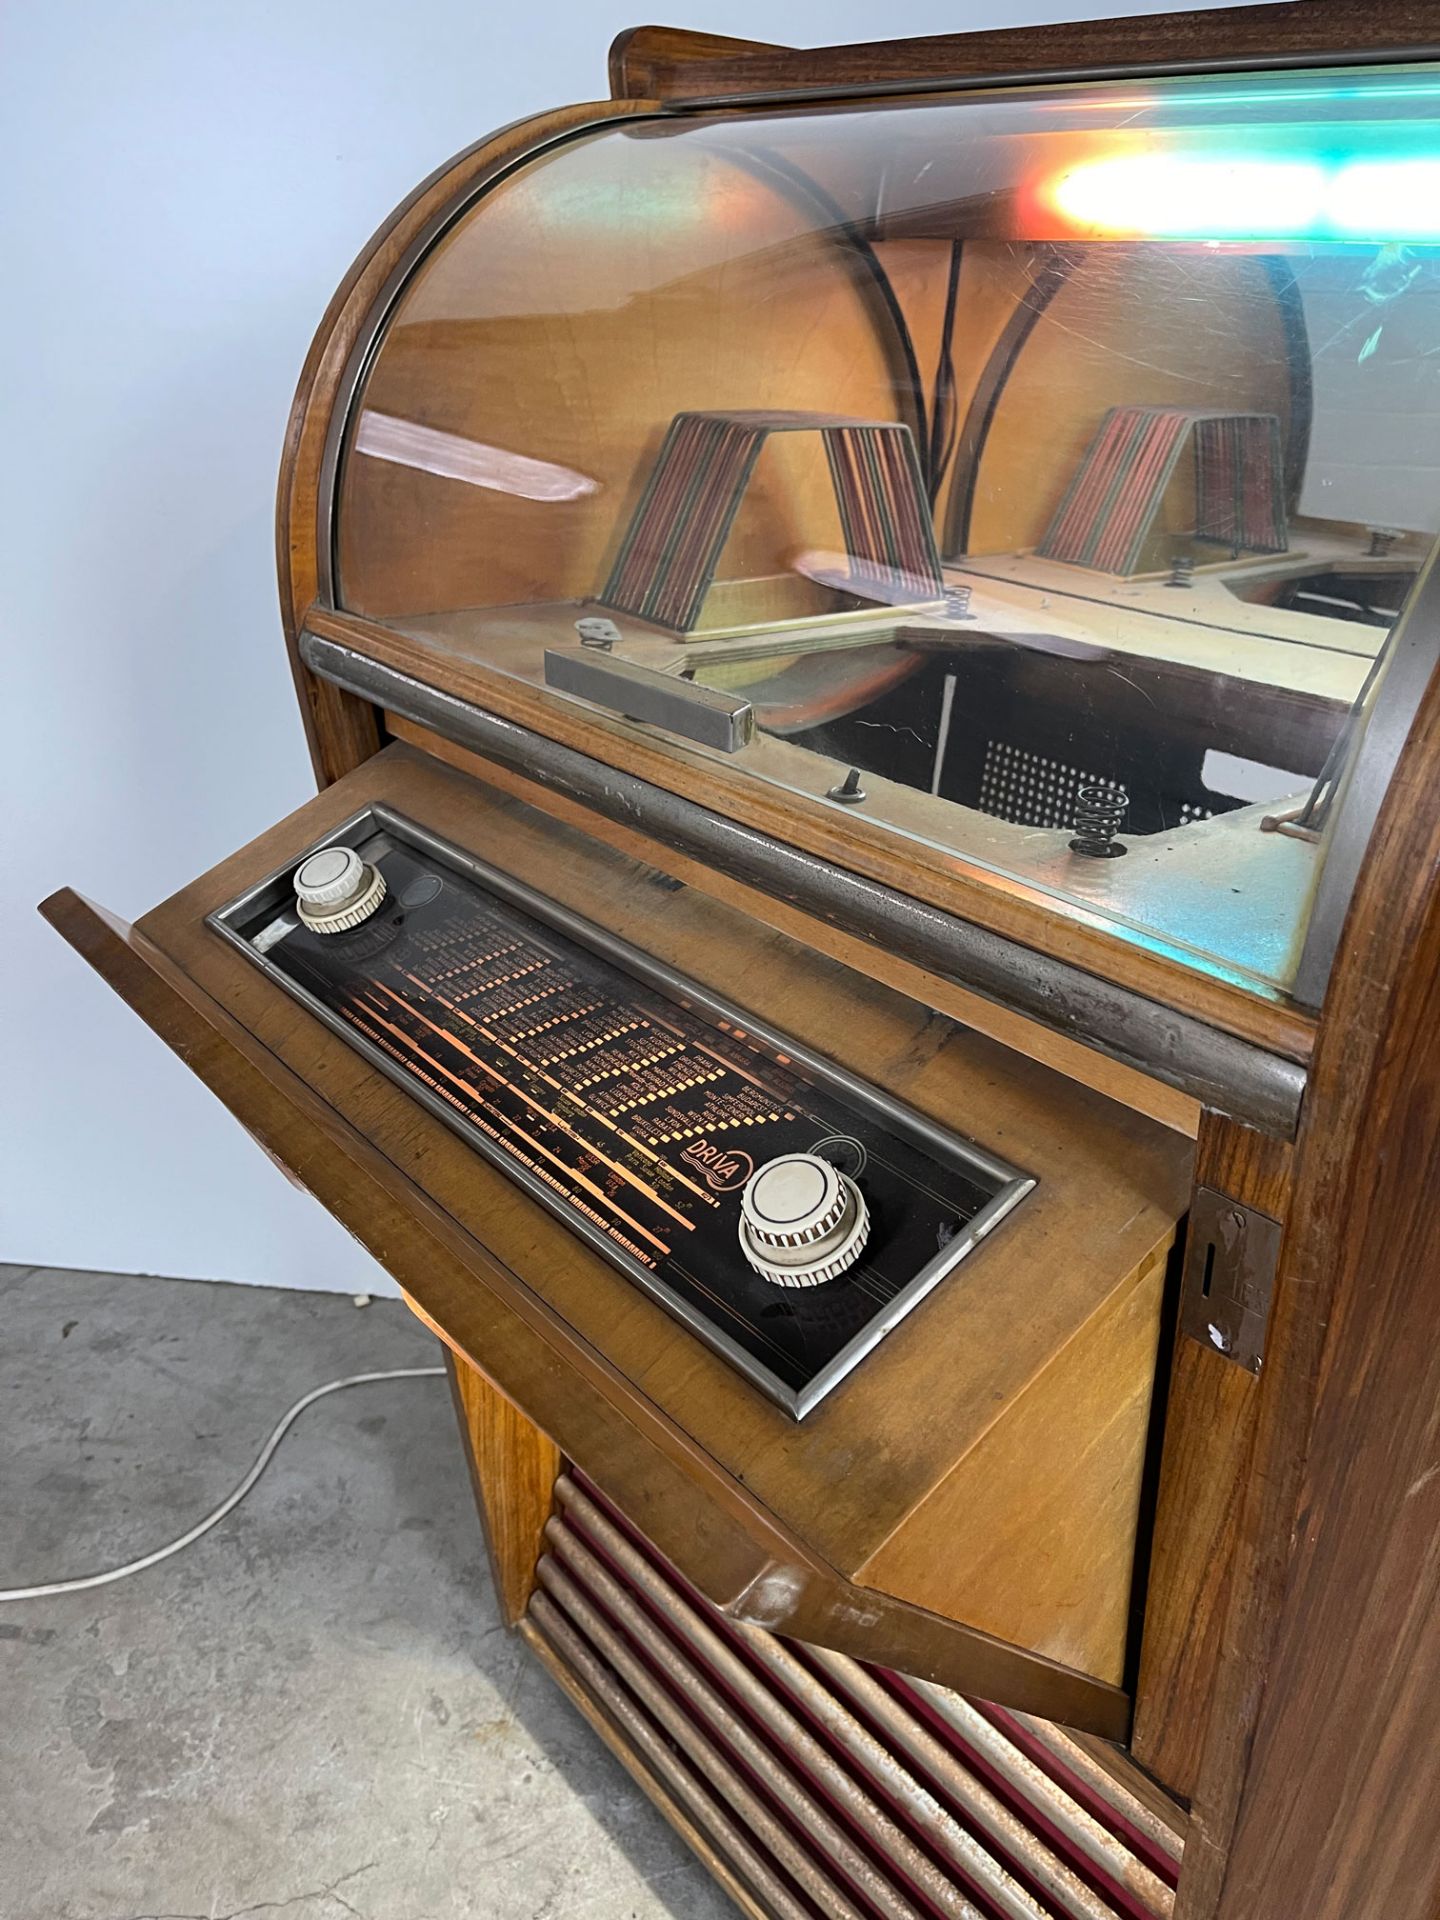 1958 Belgian Driva "Brabant Box" Coin-Op Radio and Record Player Jukebox - Image 11 of 14